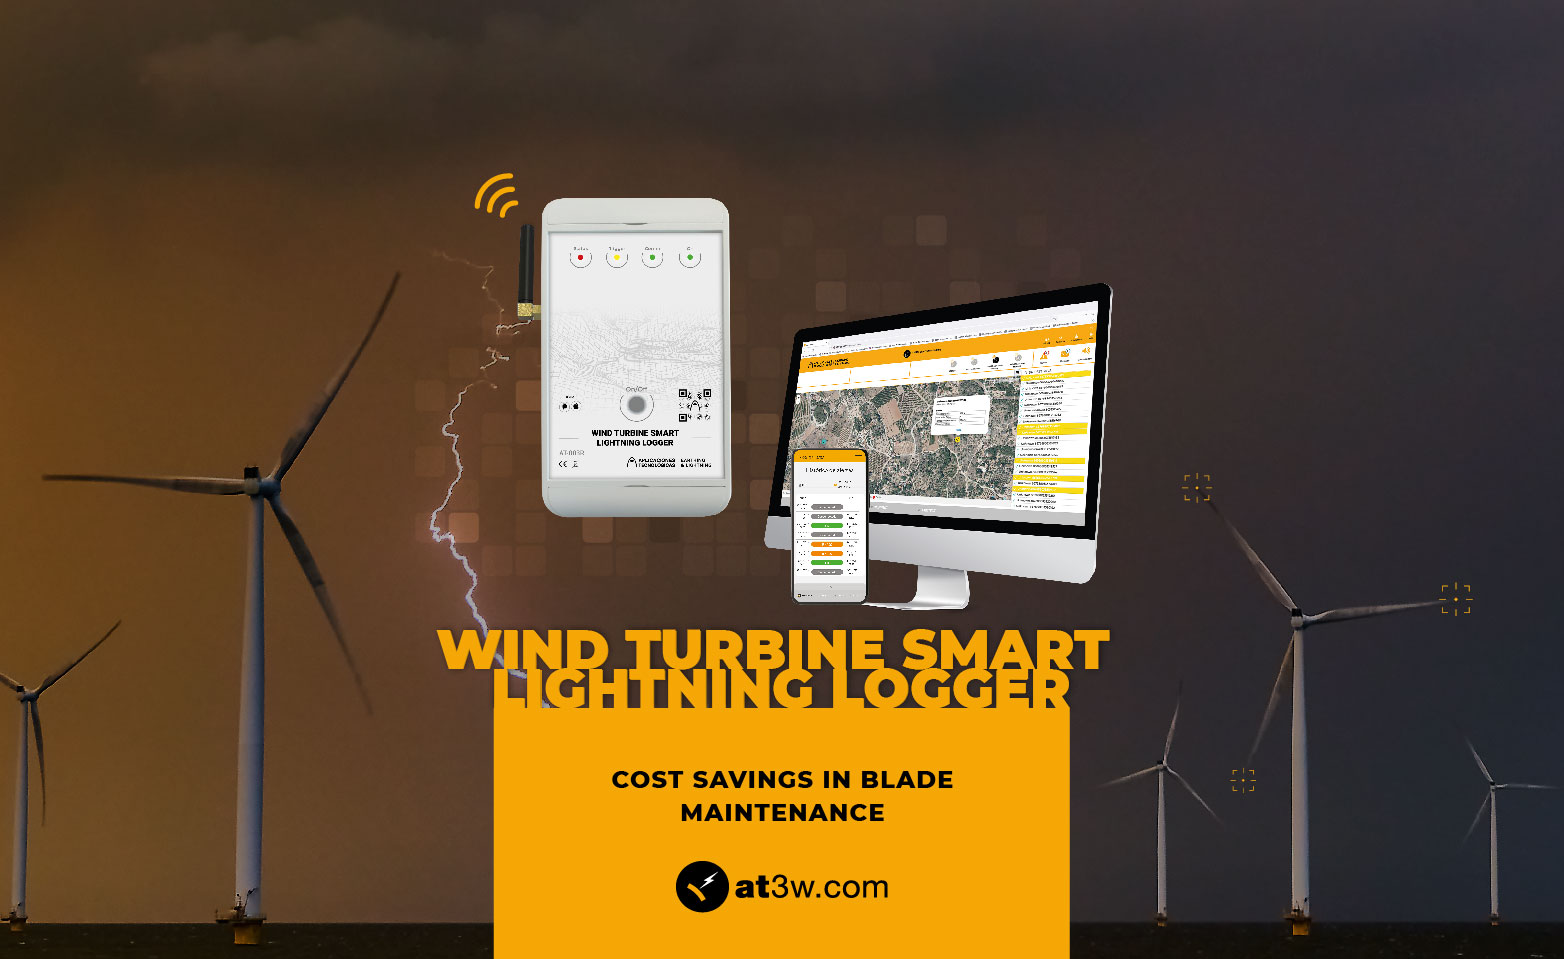 Aplicaciones Tecnológicas S.A. launches its new product WIND TURBINE SMART LIGHTNING LOGGER which, by means of real-time monitoring of lightning strikes on wind turbine blades, makes it possible to identify damage to the blades, thus avoiding large-scale economic losses.